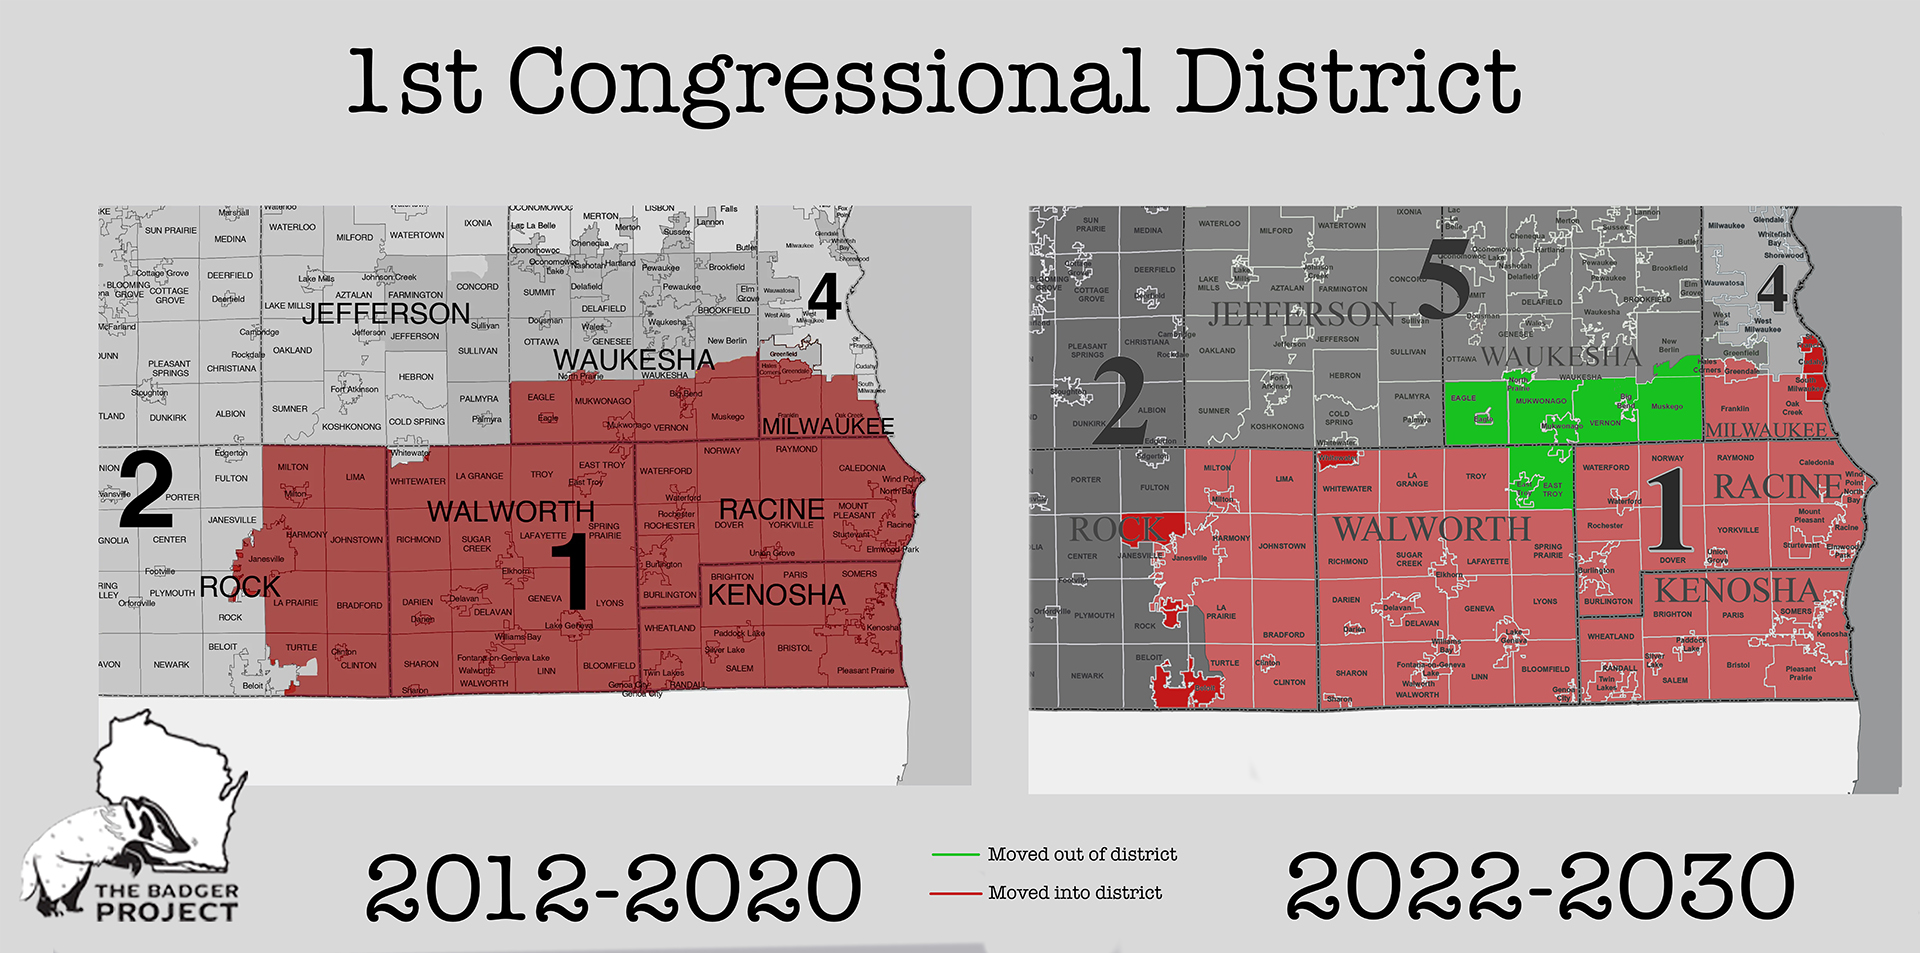 Two side-by-side maps show the boundaries of Wisconsin's 1st Congressional District from 2012 to 2022, and those established for 2022 to 2030.